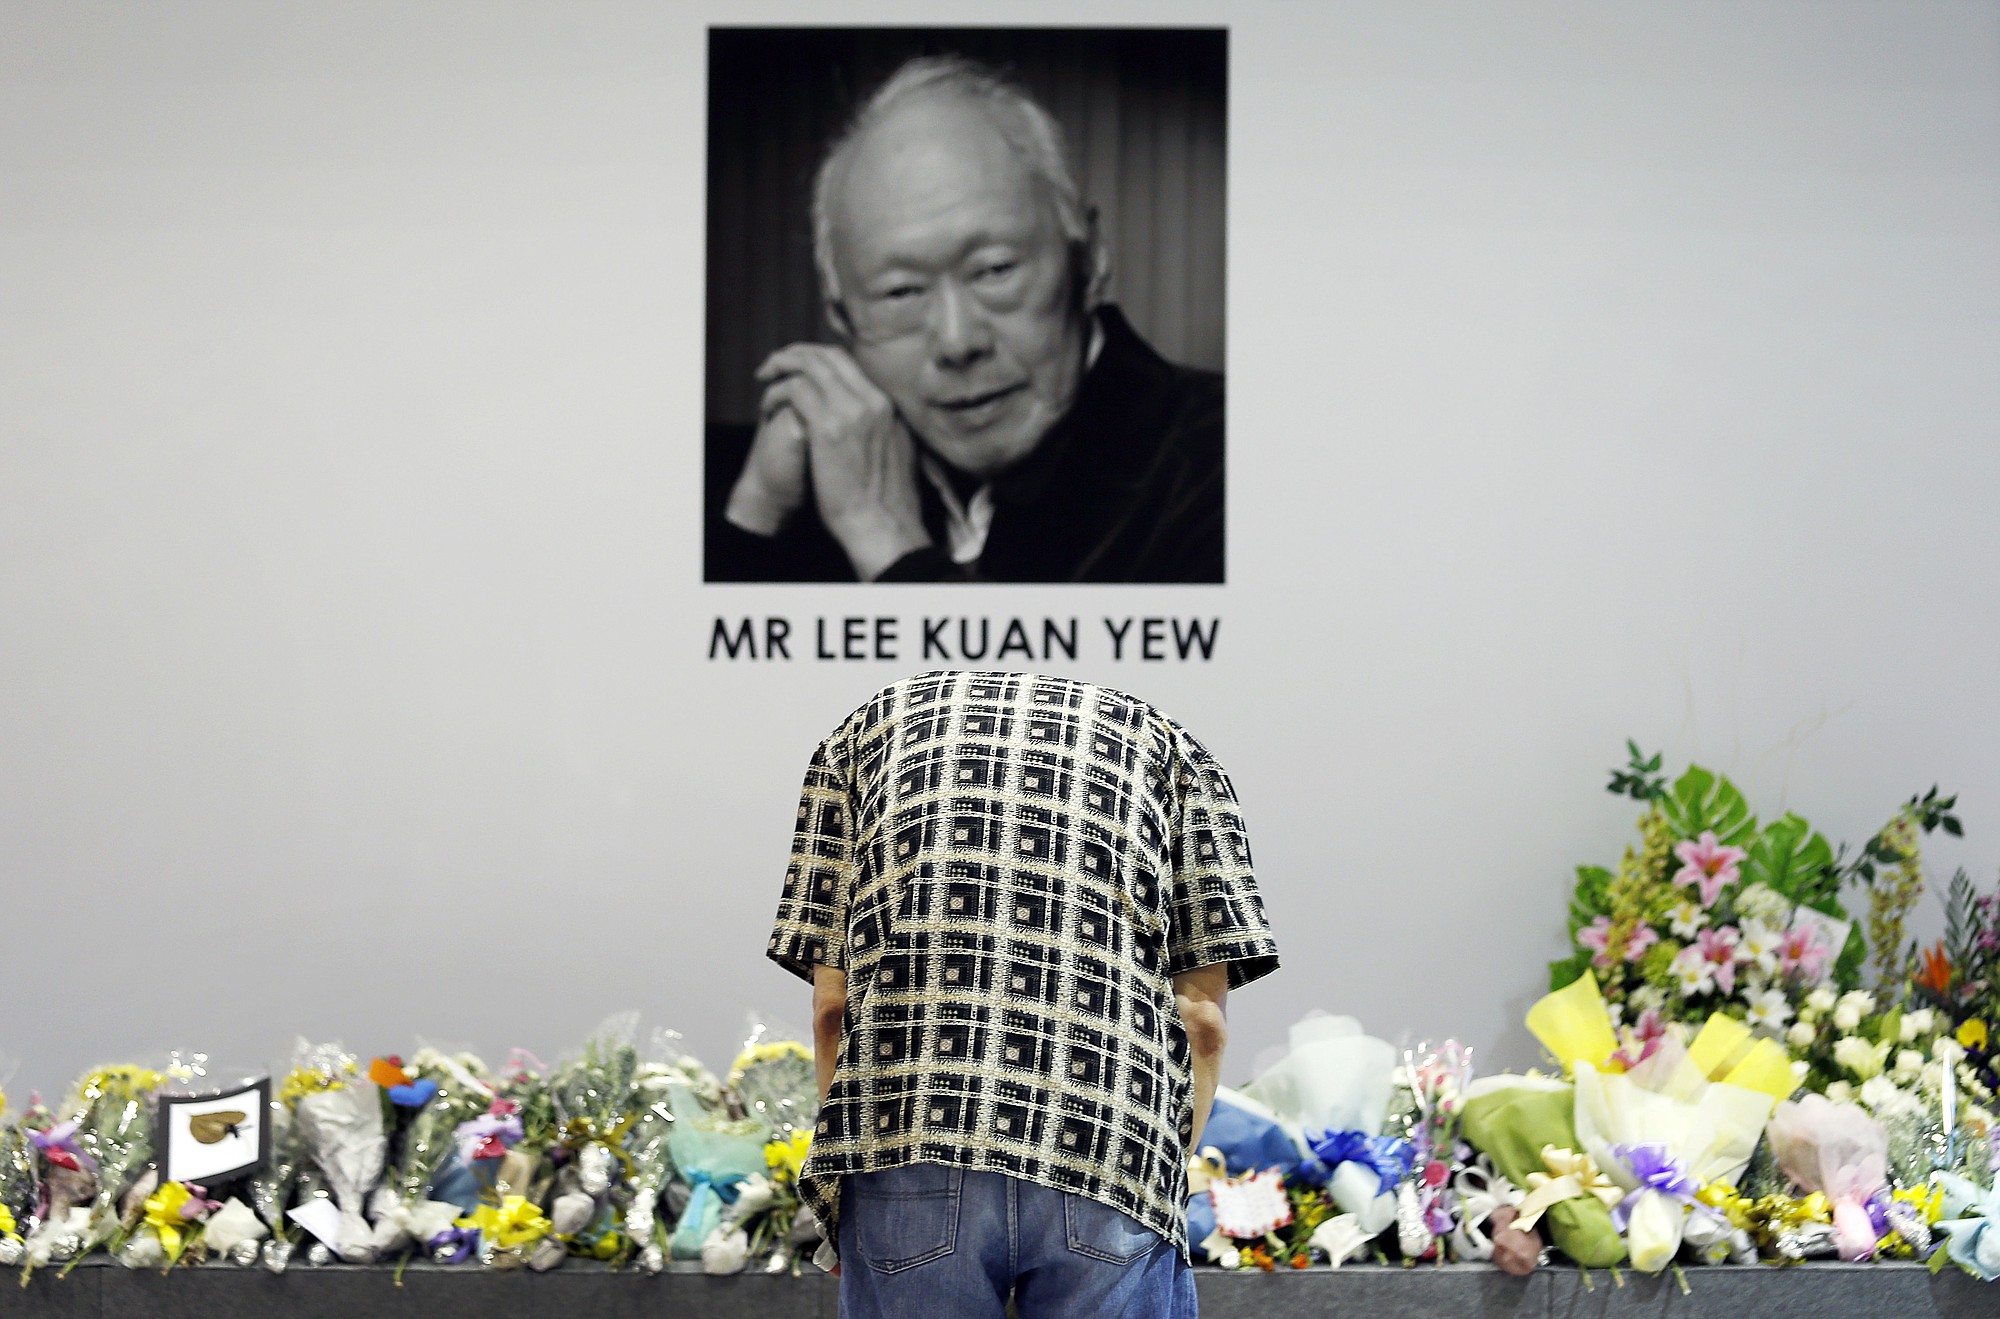 A man bows to pay his respects to the late Lee Kuan Yew at a community club where members of the public can gather to express their condolences Monday in Singapore.